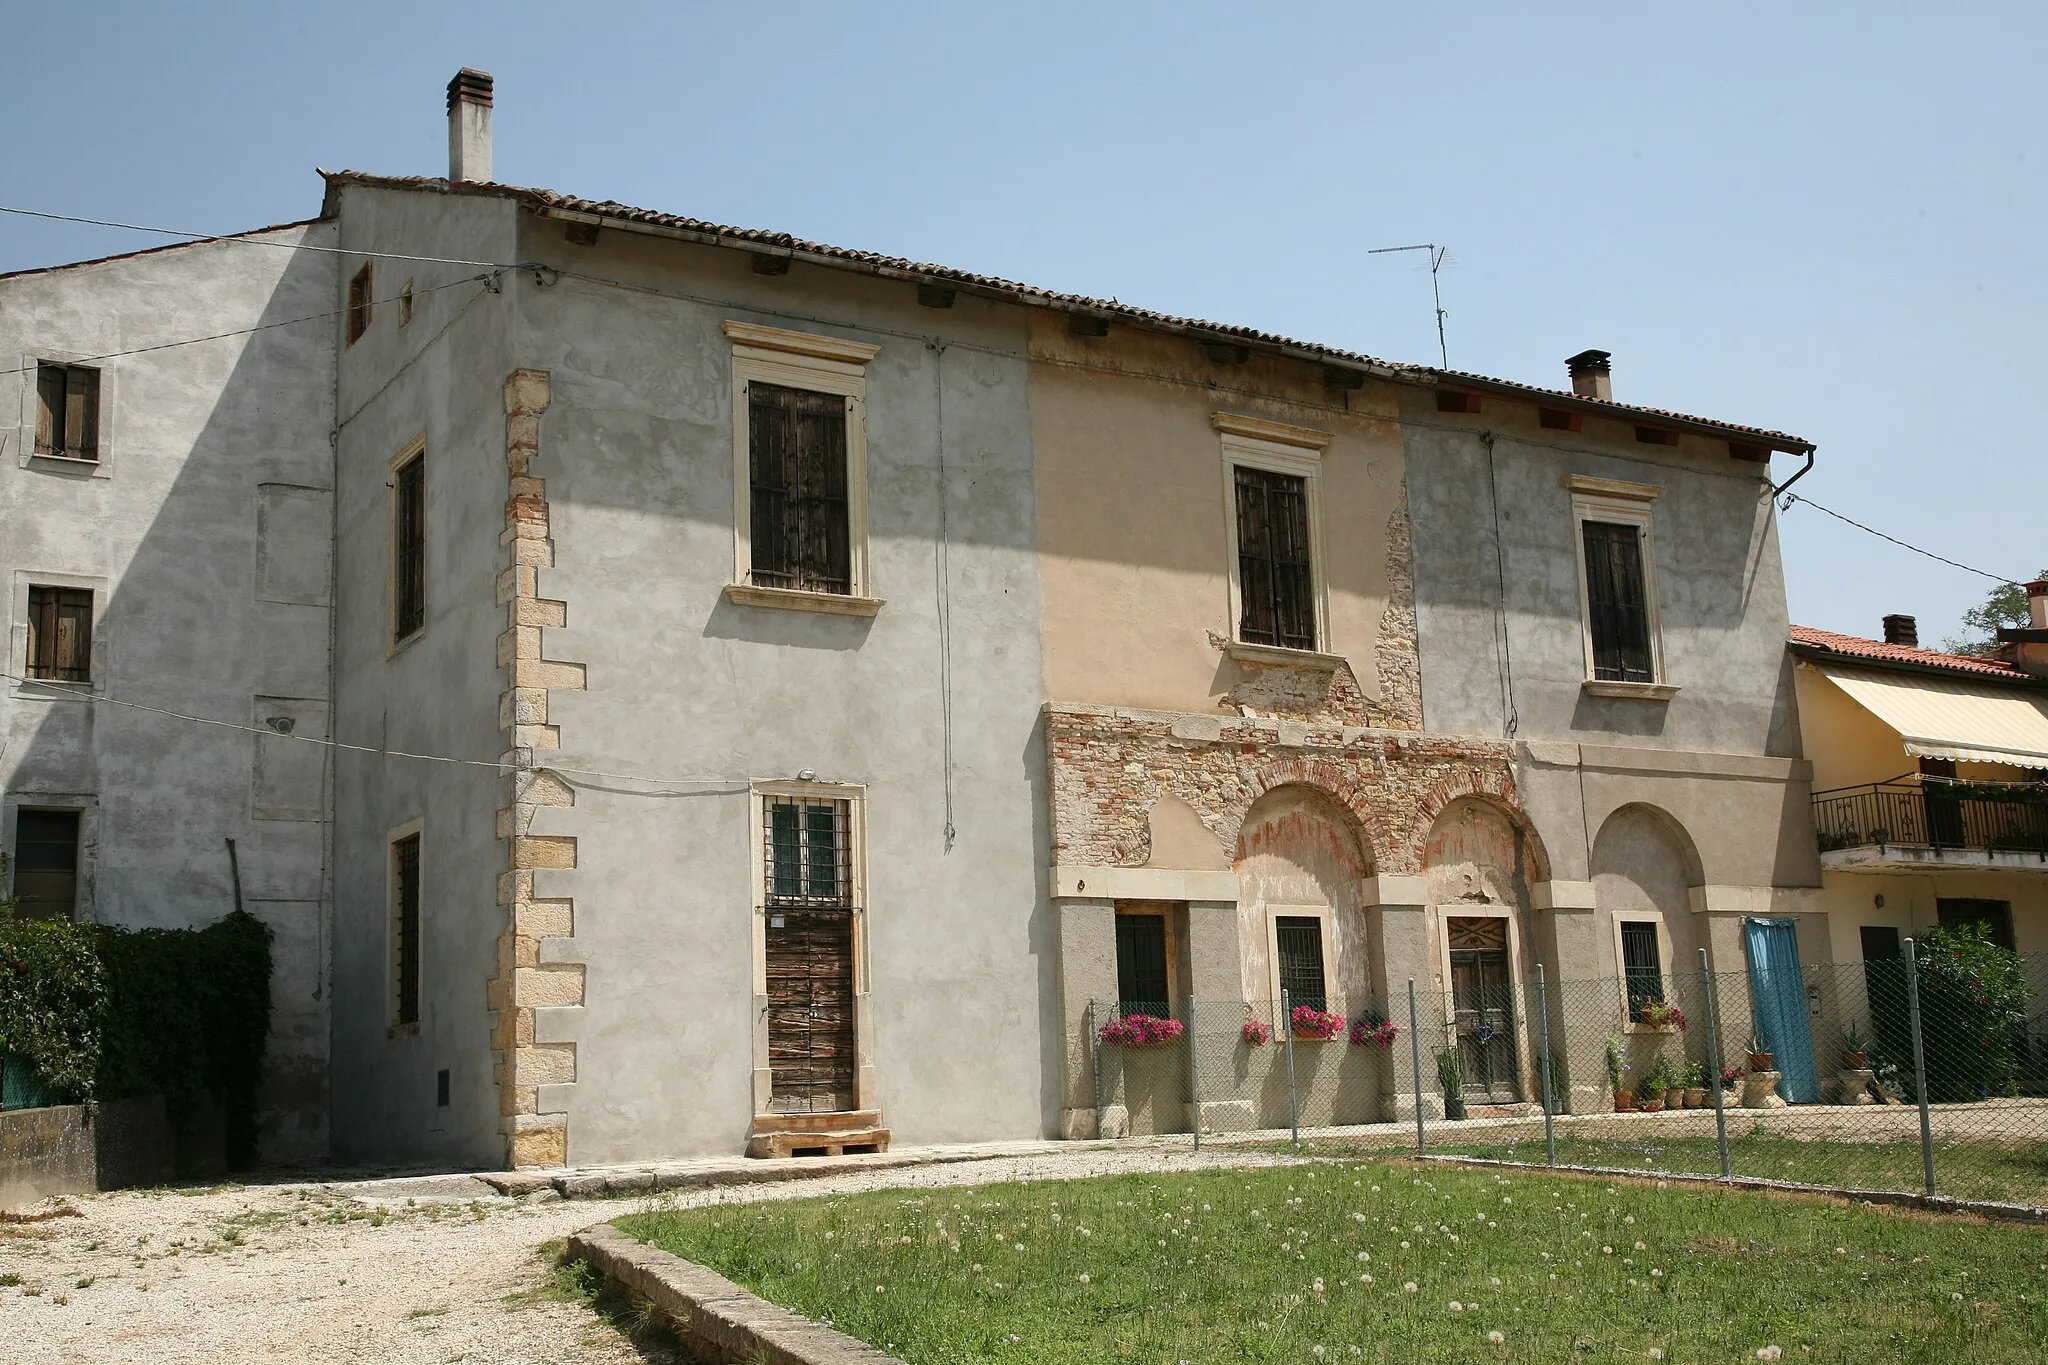 Photo showing: Villa Arnaldi at Meledo di Sarego is an unfinished project by Andrea Palladio